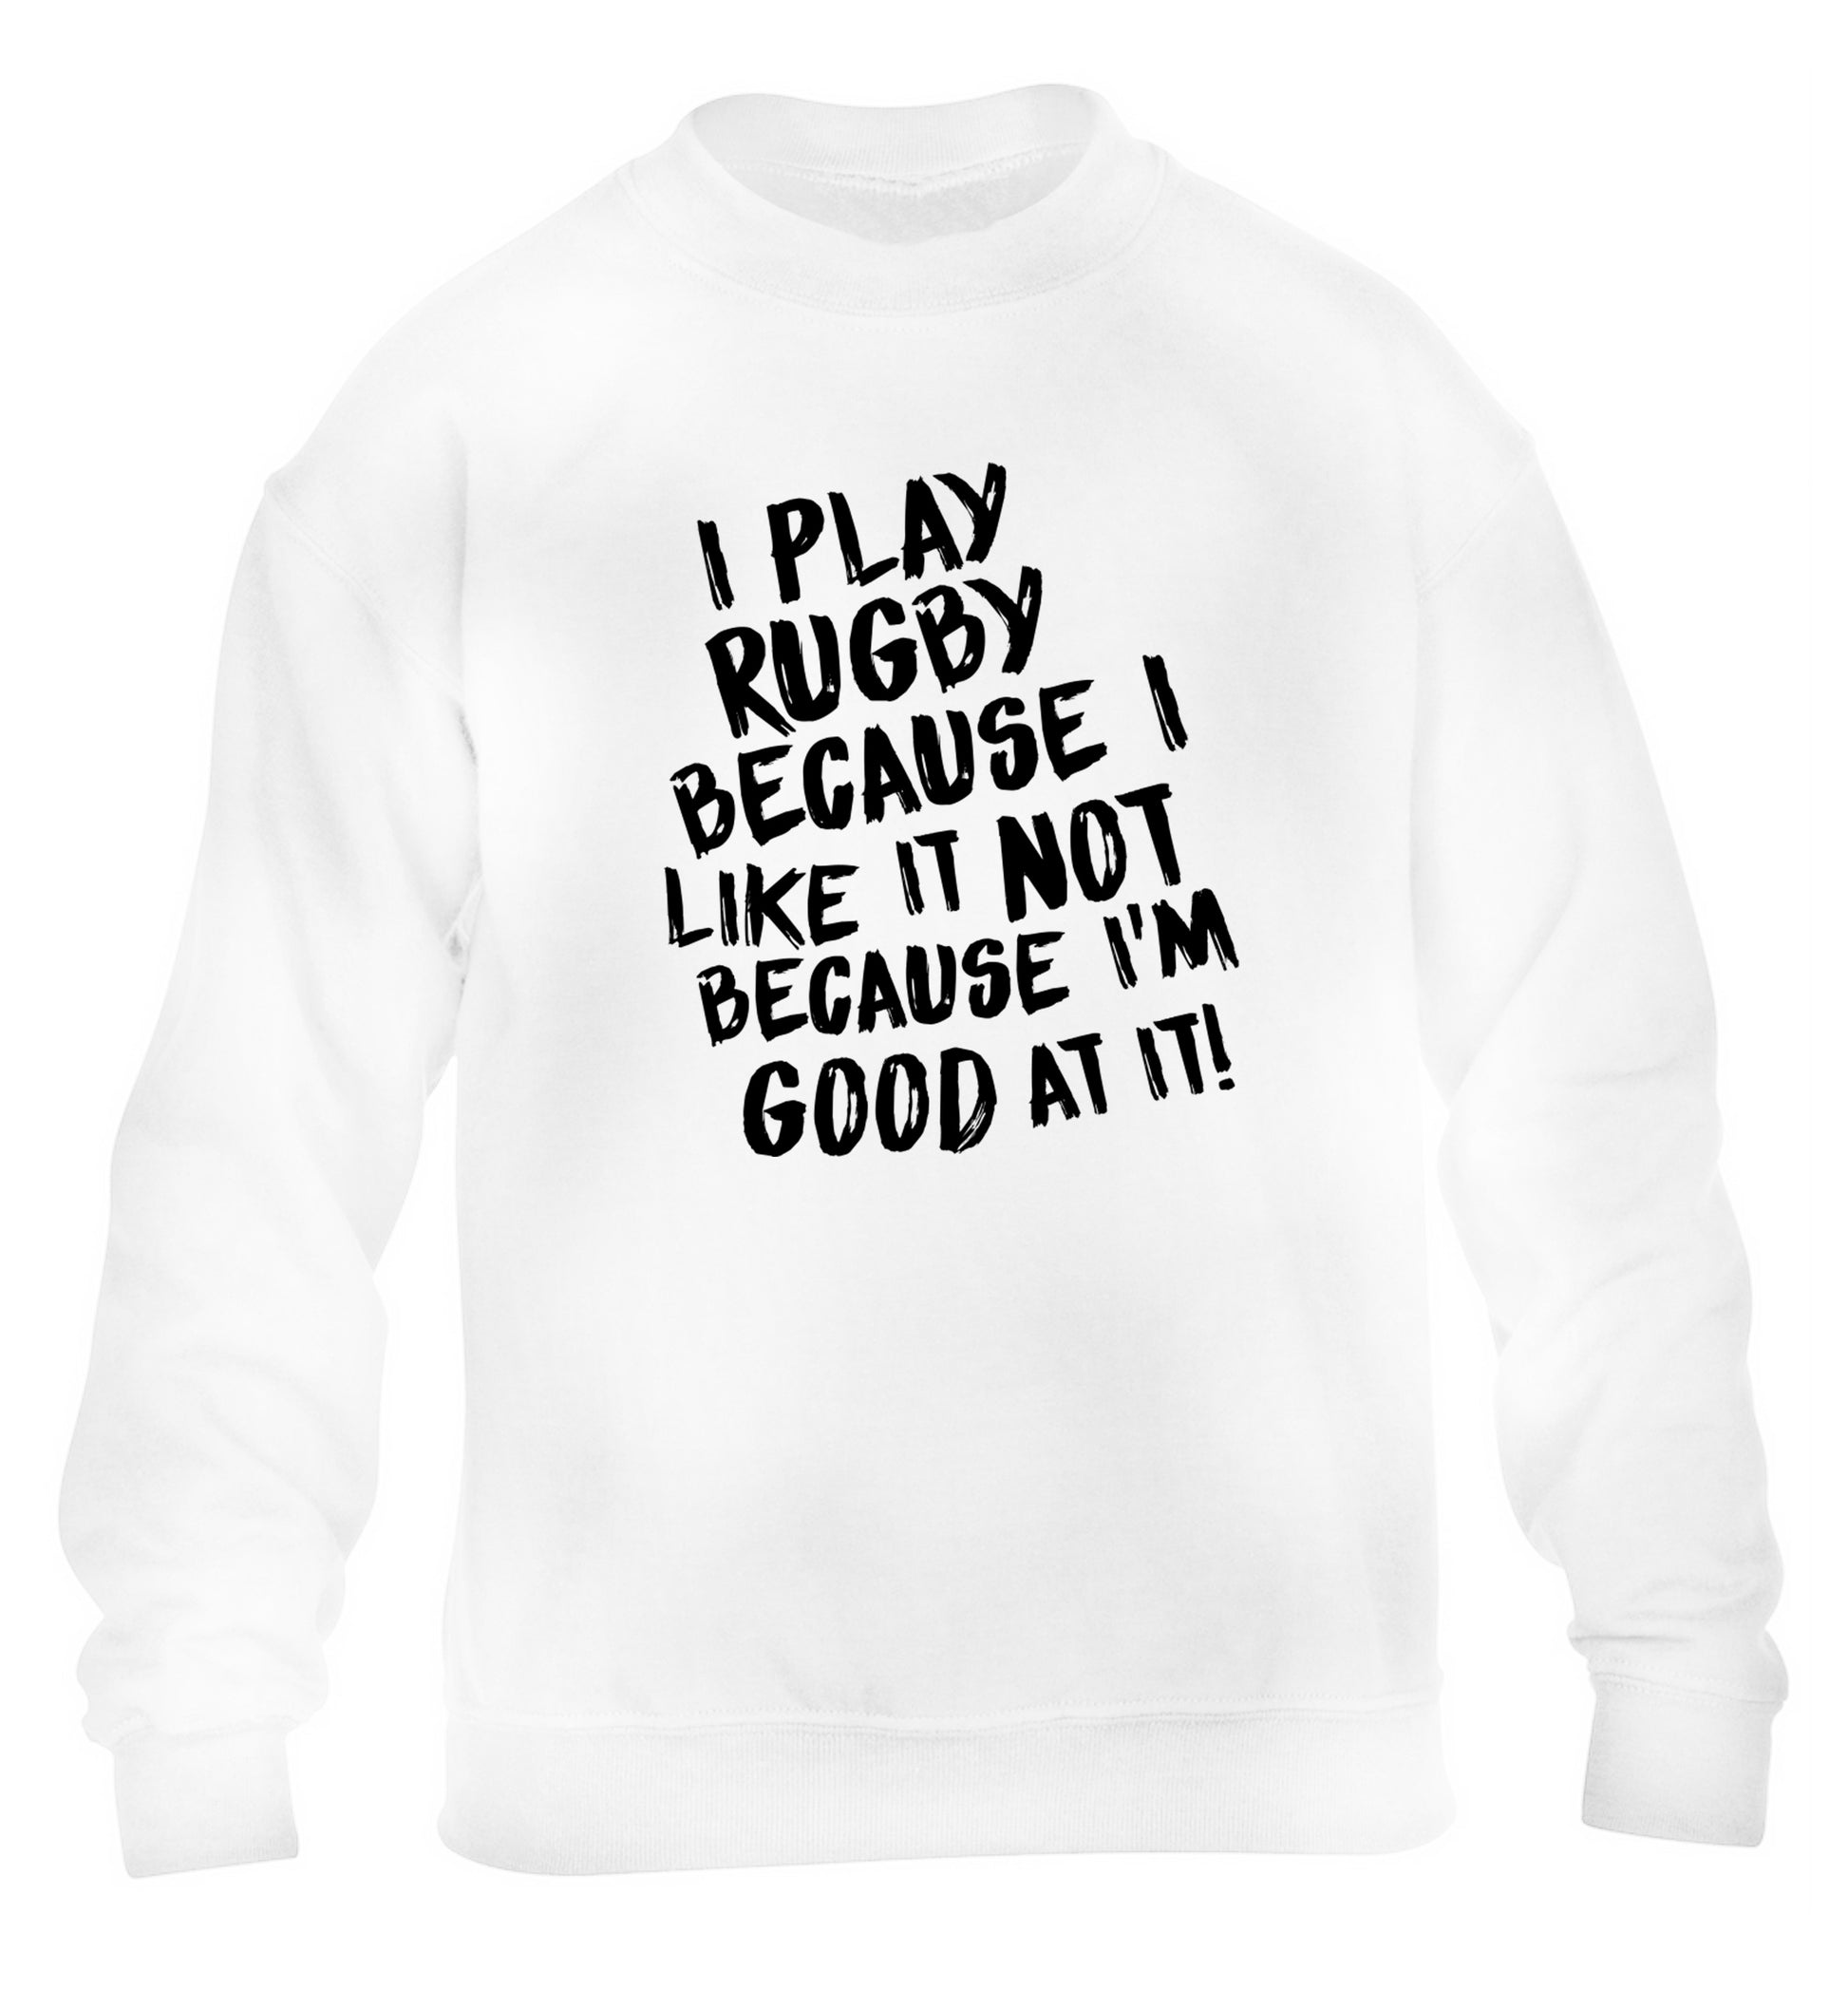 I play rugby because I like it not because I'm good at it children's white sweater 12-13 Years